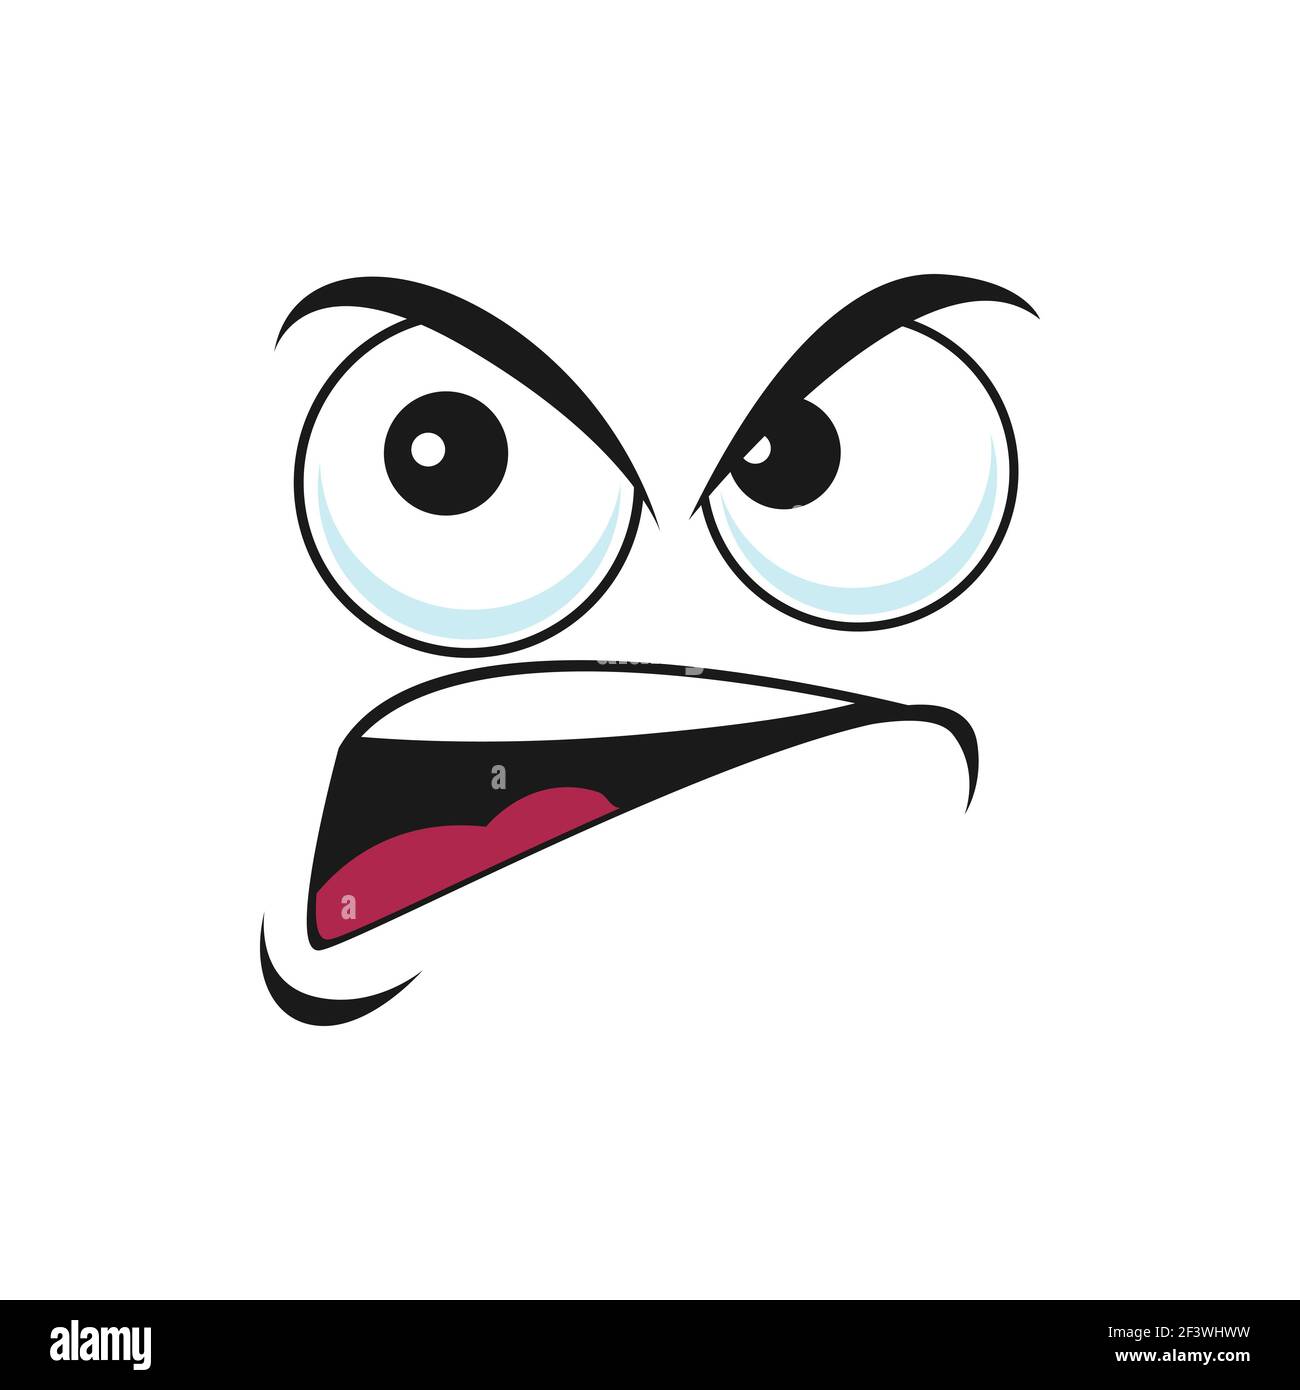 Suspicious emoticon with angry face isolated icon. Vector distrustful emoji with big eyes curved smile, doubtful or questioned smiley line art. Angry Stock Vector